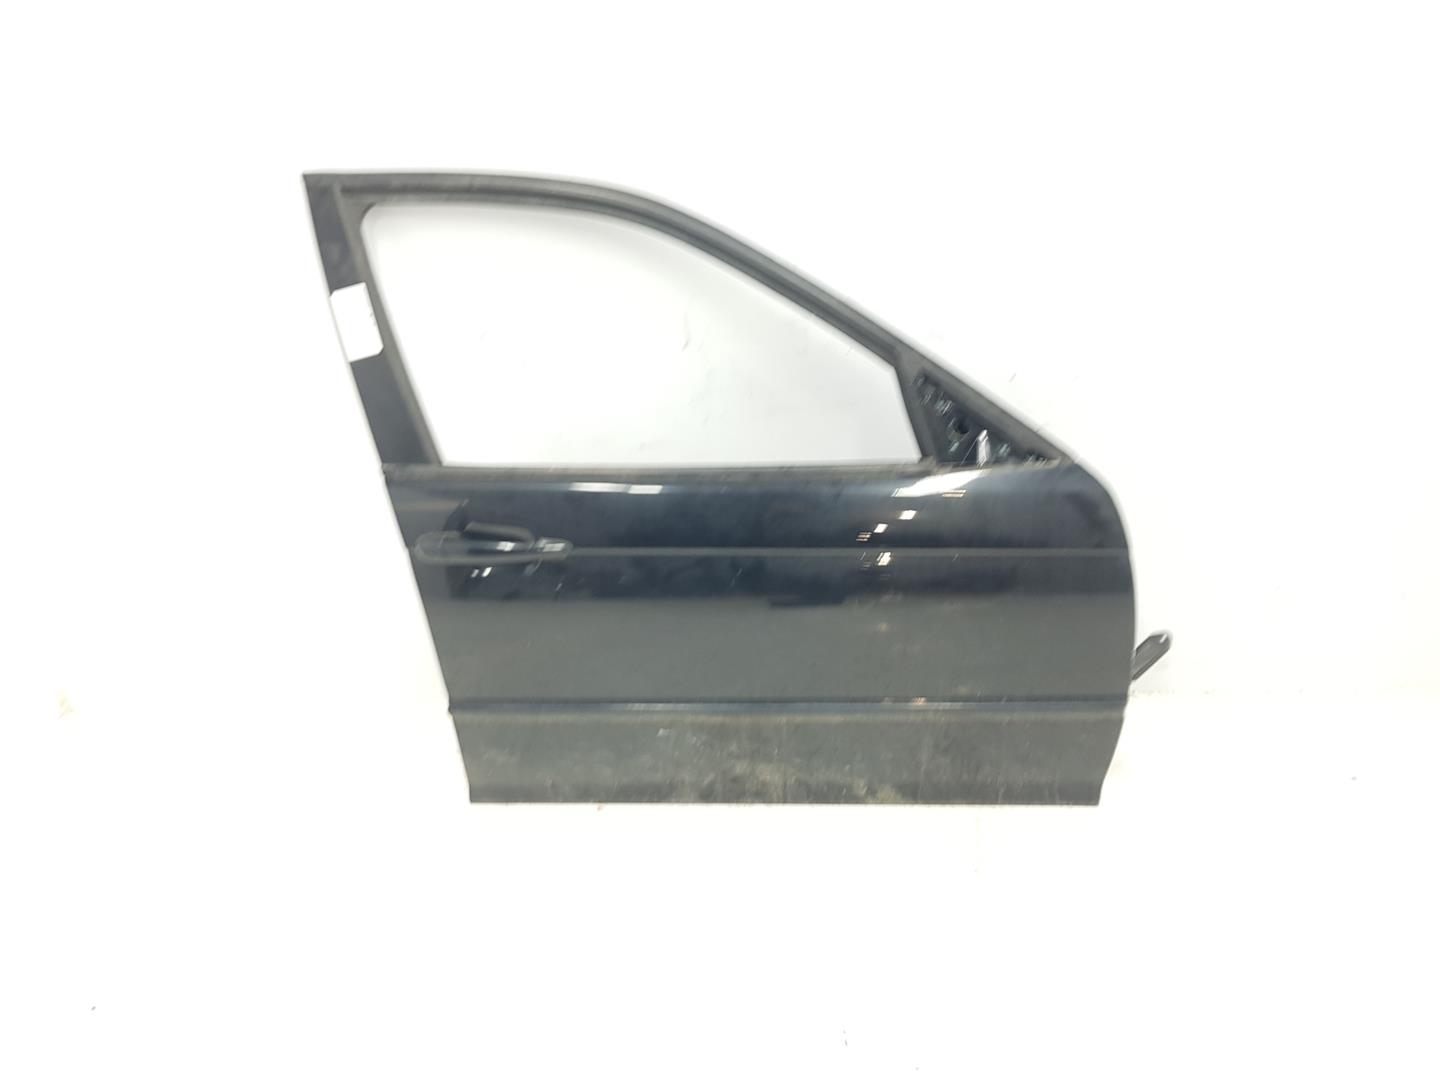 BMW 3 Series E46 (1997-2006) Front Right Door 41517034152, 41517034152, COLORNEGRO475 19829072